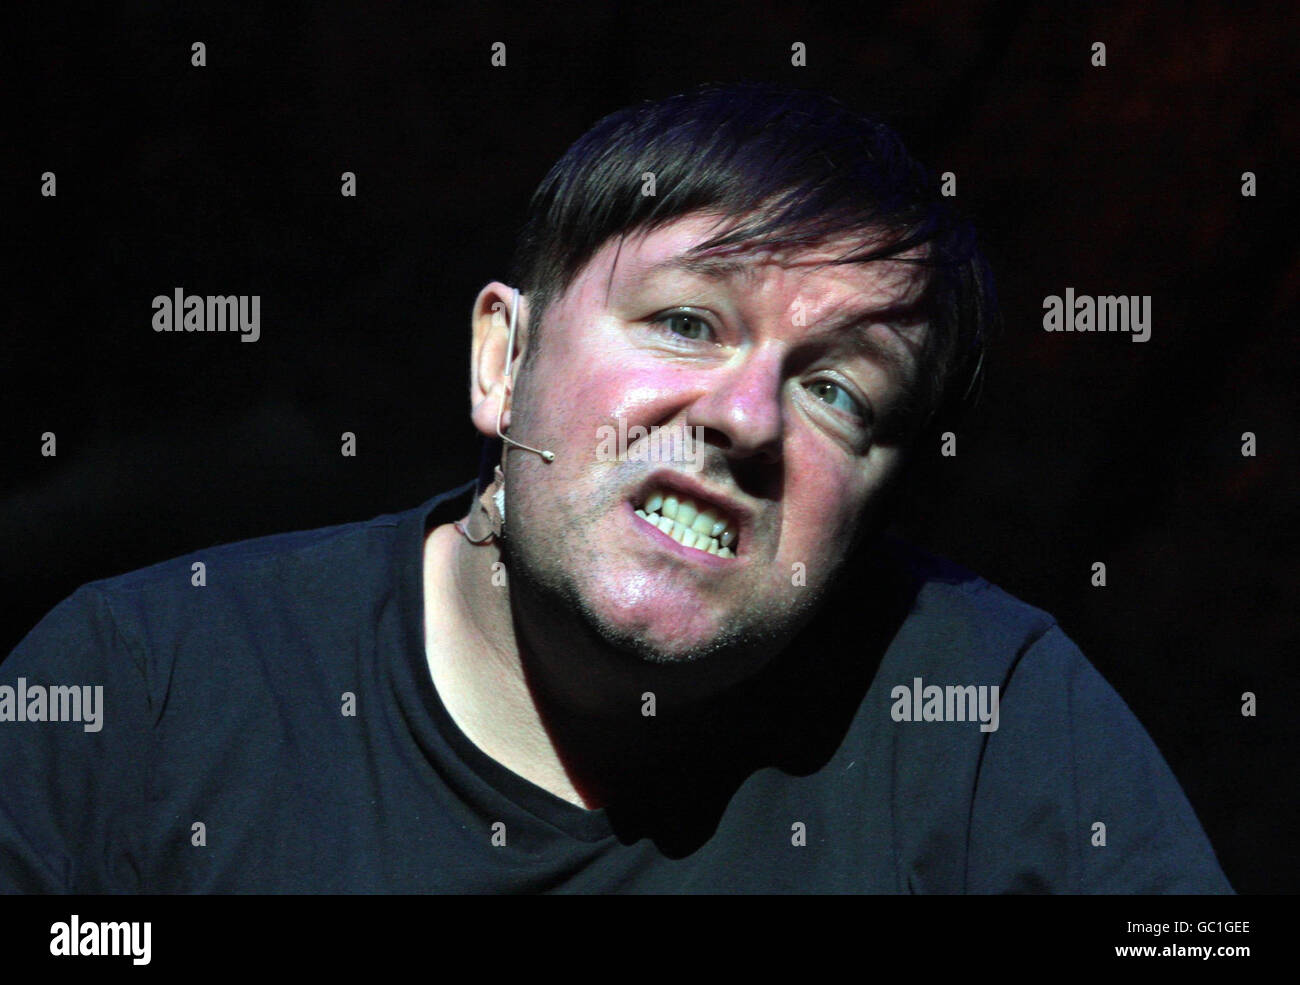 Ricky Gervais gets ready for his one night show at the Edinburgh Playhouse Theatre, Edinburgh, promoting his upcoming UK tour Science. Stock Photo